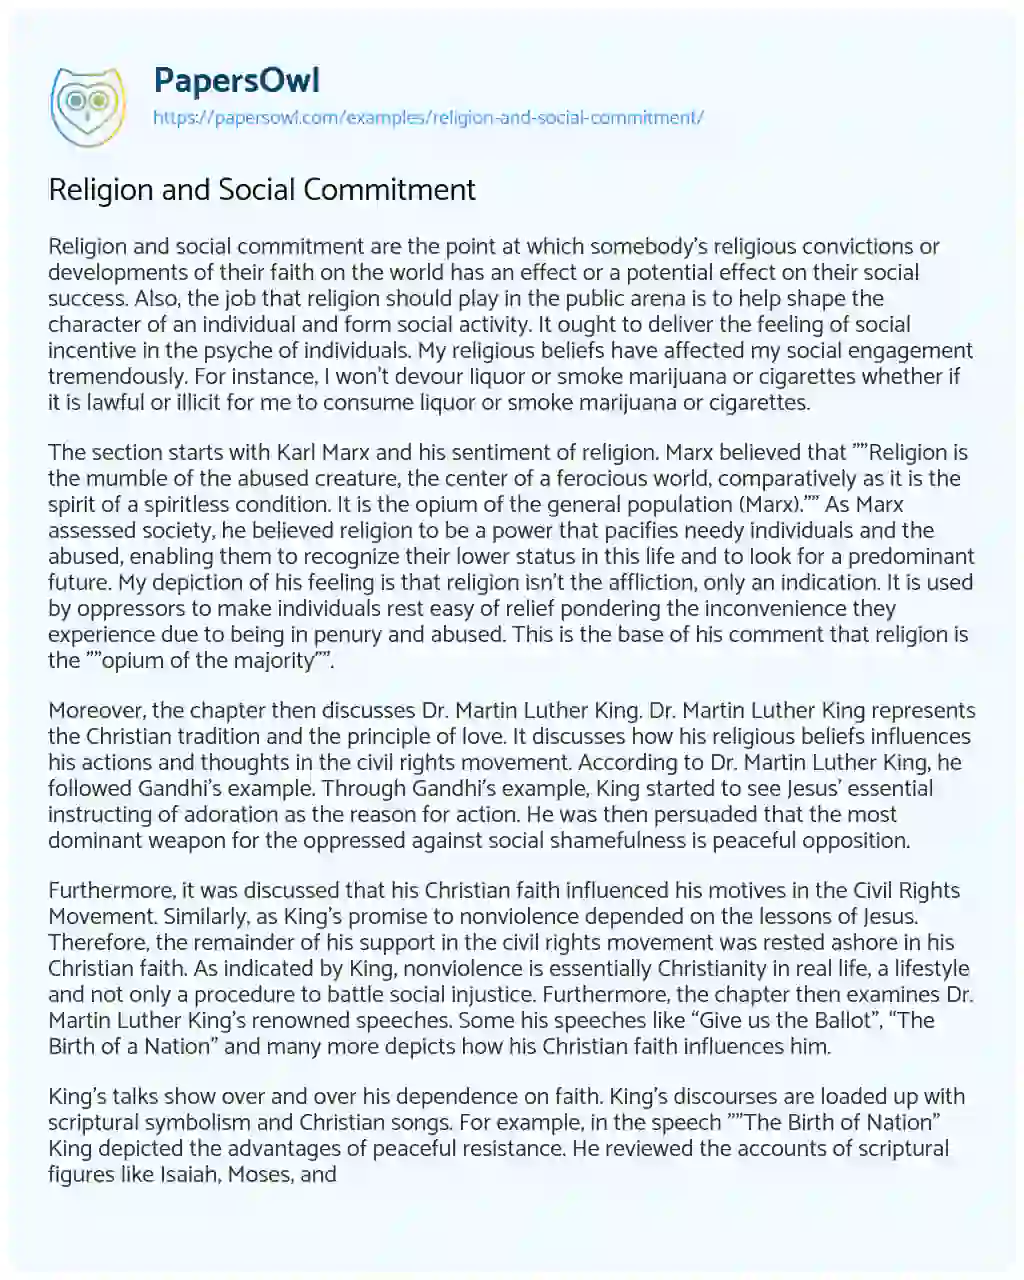 Essay on Religion and Social Commitment